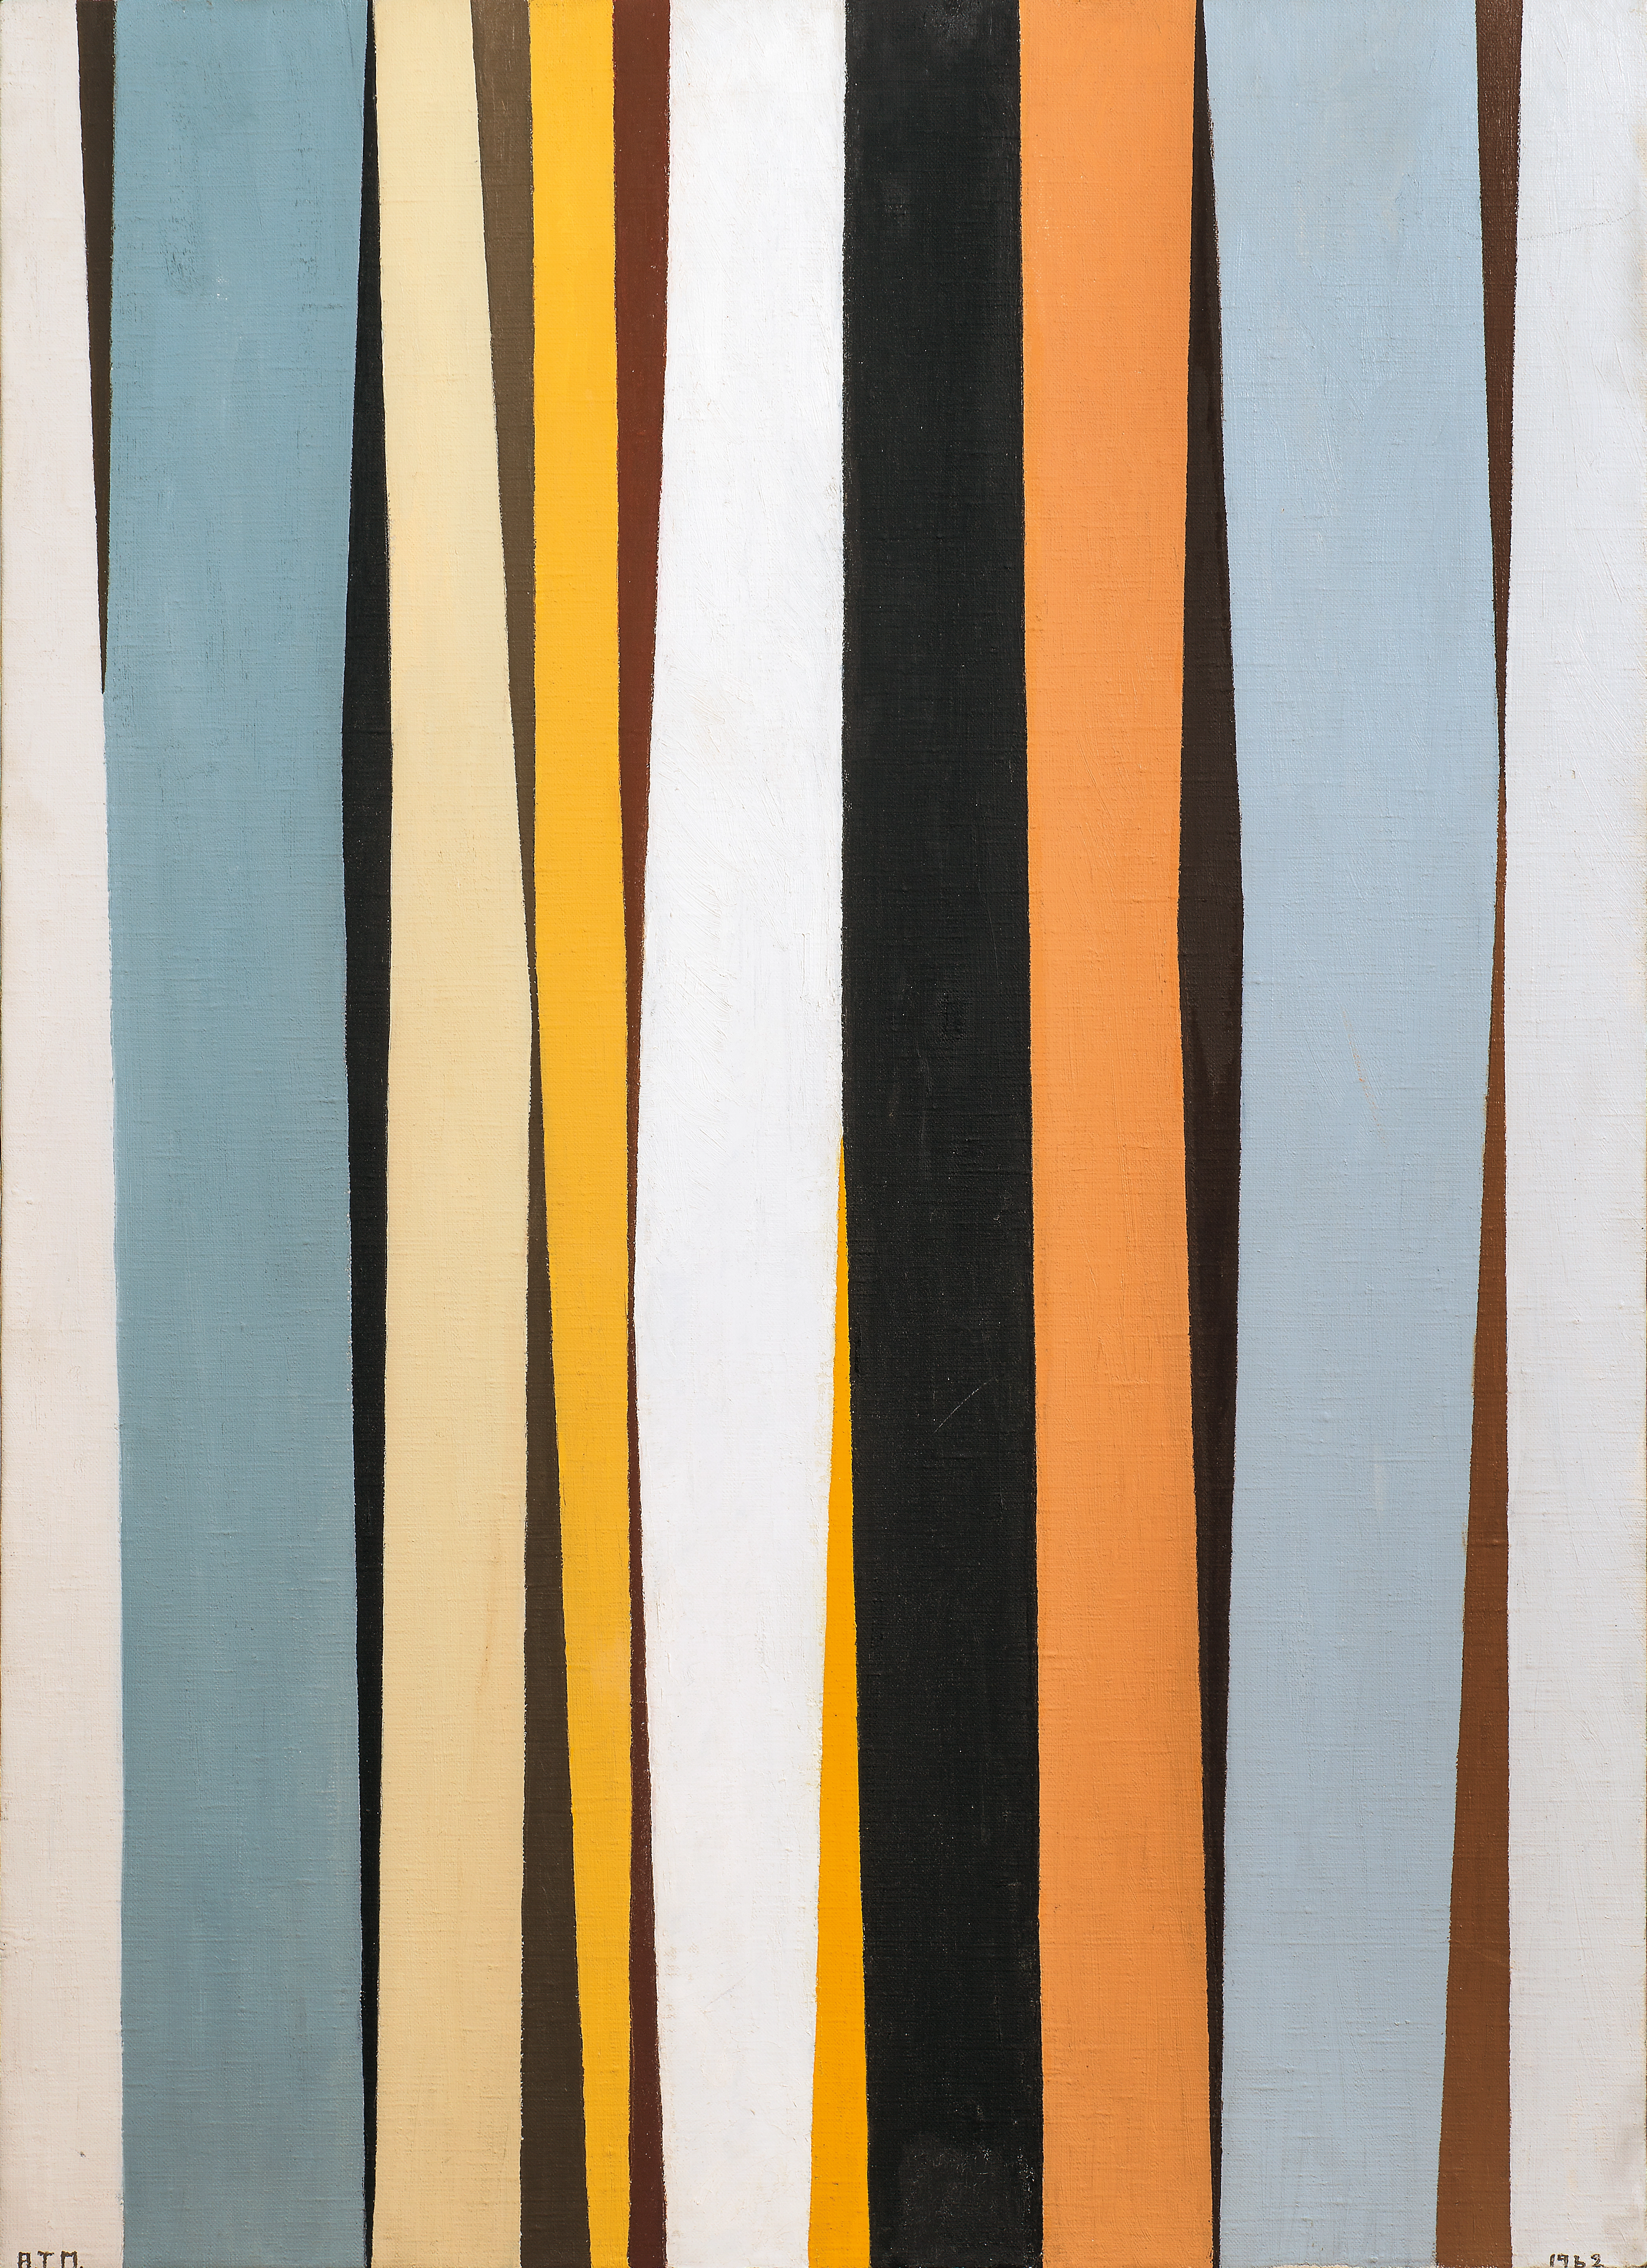 Oil on canvas painting of vertical light blues, yellows, oranges, browns, white and black bars, made of varying thicknesses.